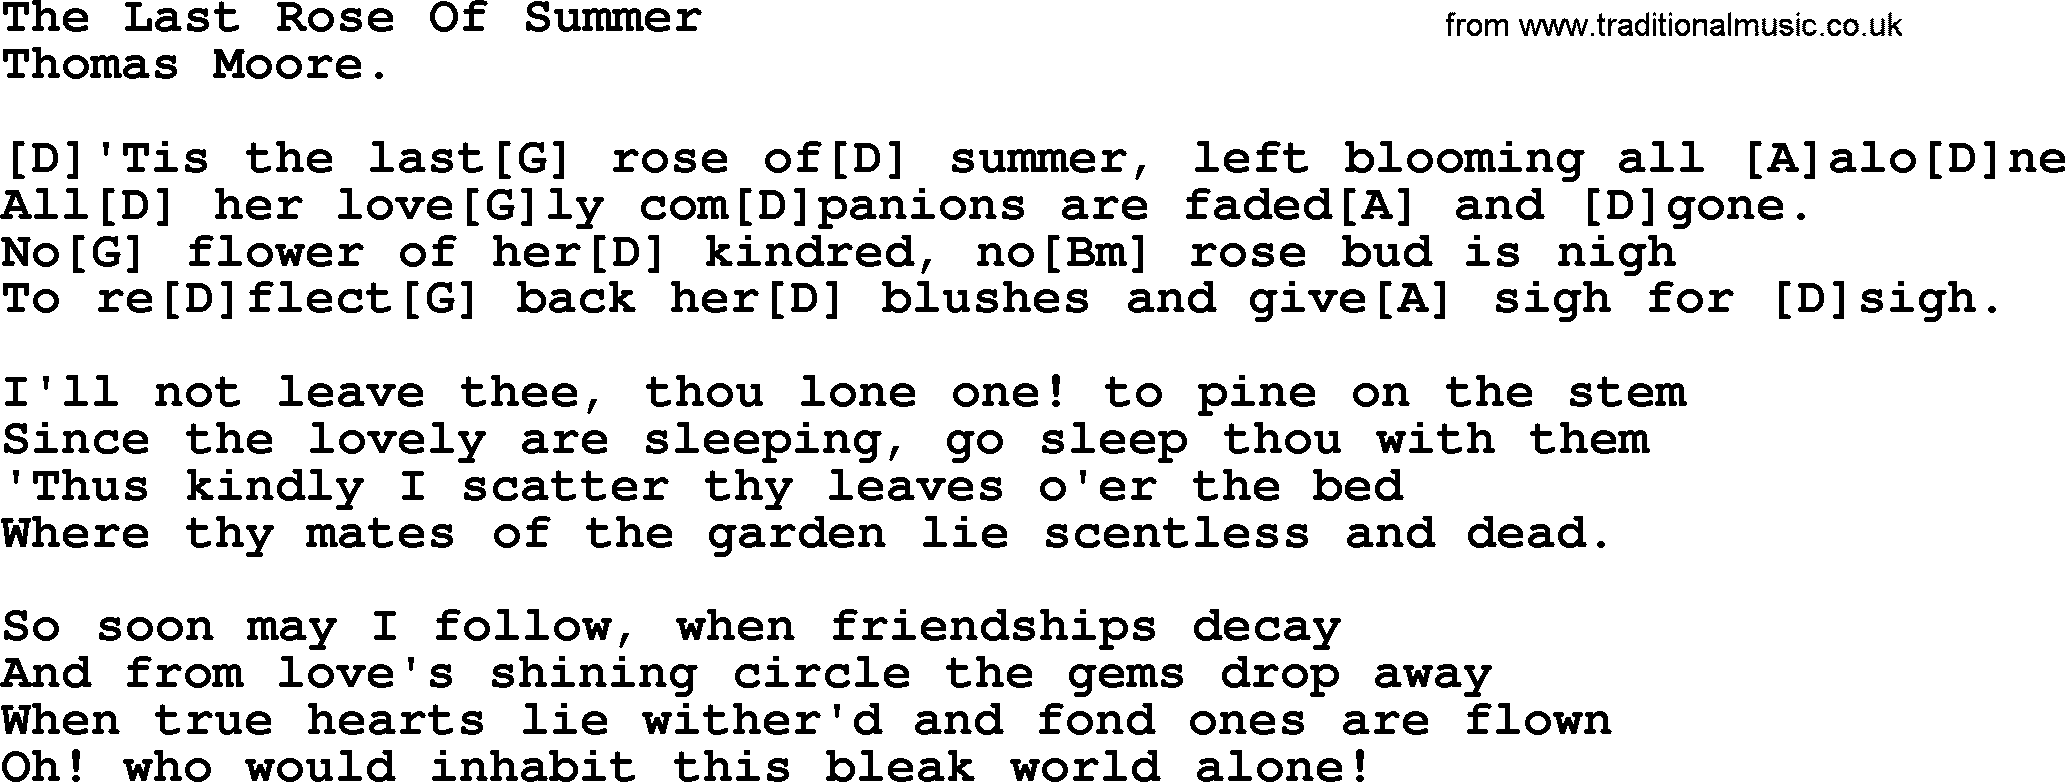 Top 1000 Most Popular Folk and Old-time Songs: The Last Rose Of Summer, lyrics and chords